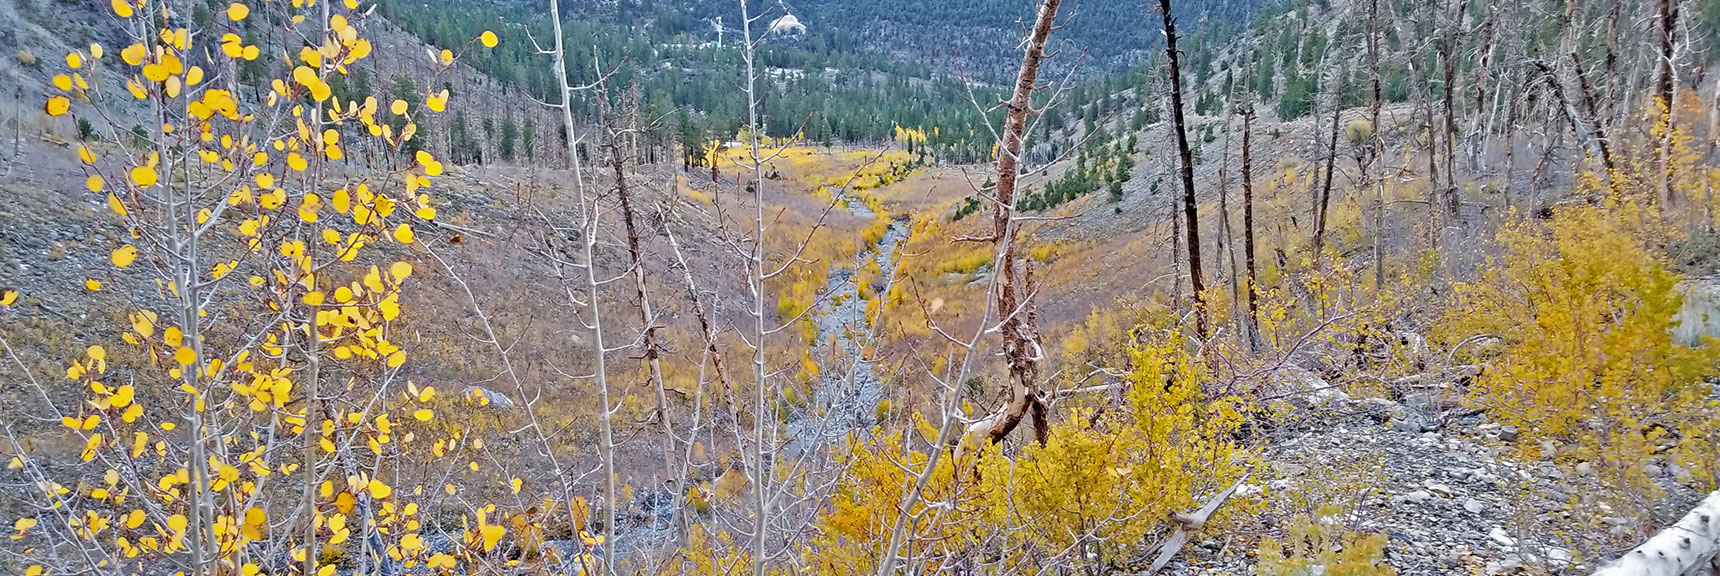 Colorful Fall Aspens Winding Down the Canyon Toward the South Loop Trailhead | Charleston Peak Loop October Snow Dusting | Mt. Charleston Wilderness | Spring Mountains, Nevada